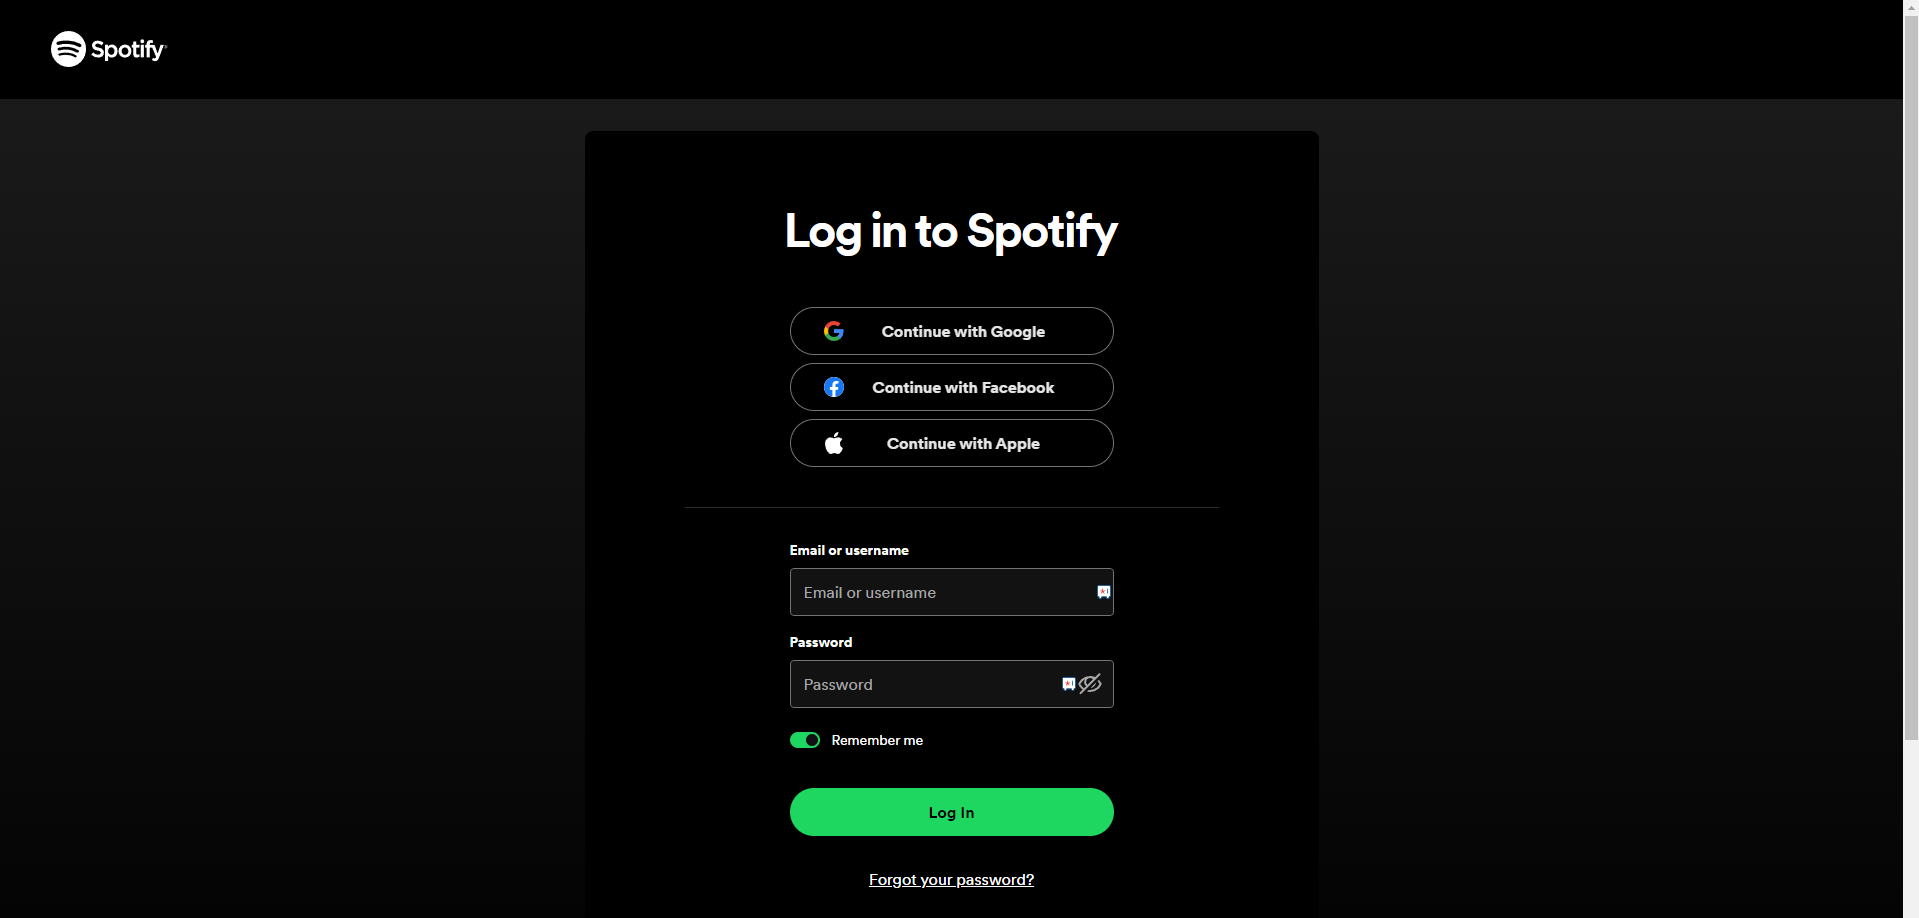 Log in to Spotify